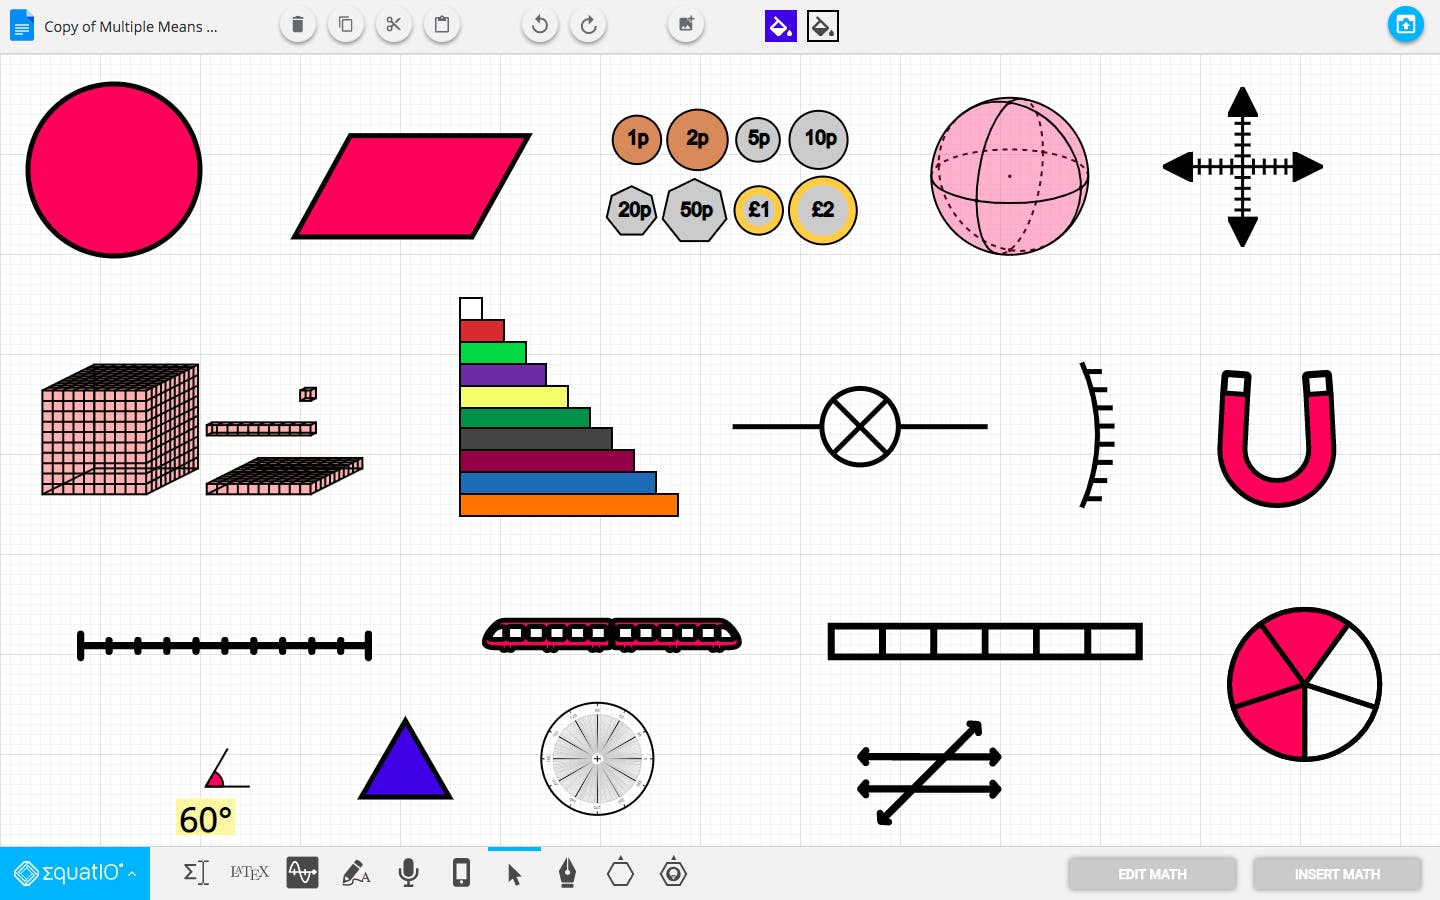 Equatio mathspace featuring different manipulatives, shapes, coins, counters, fractions 